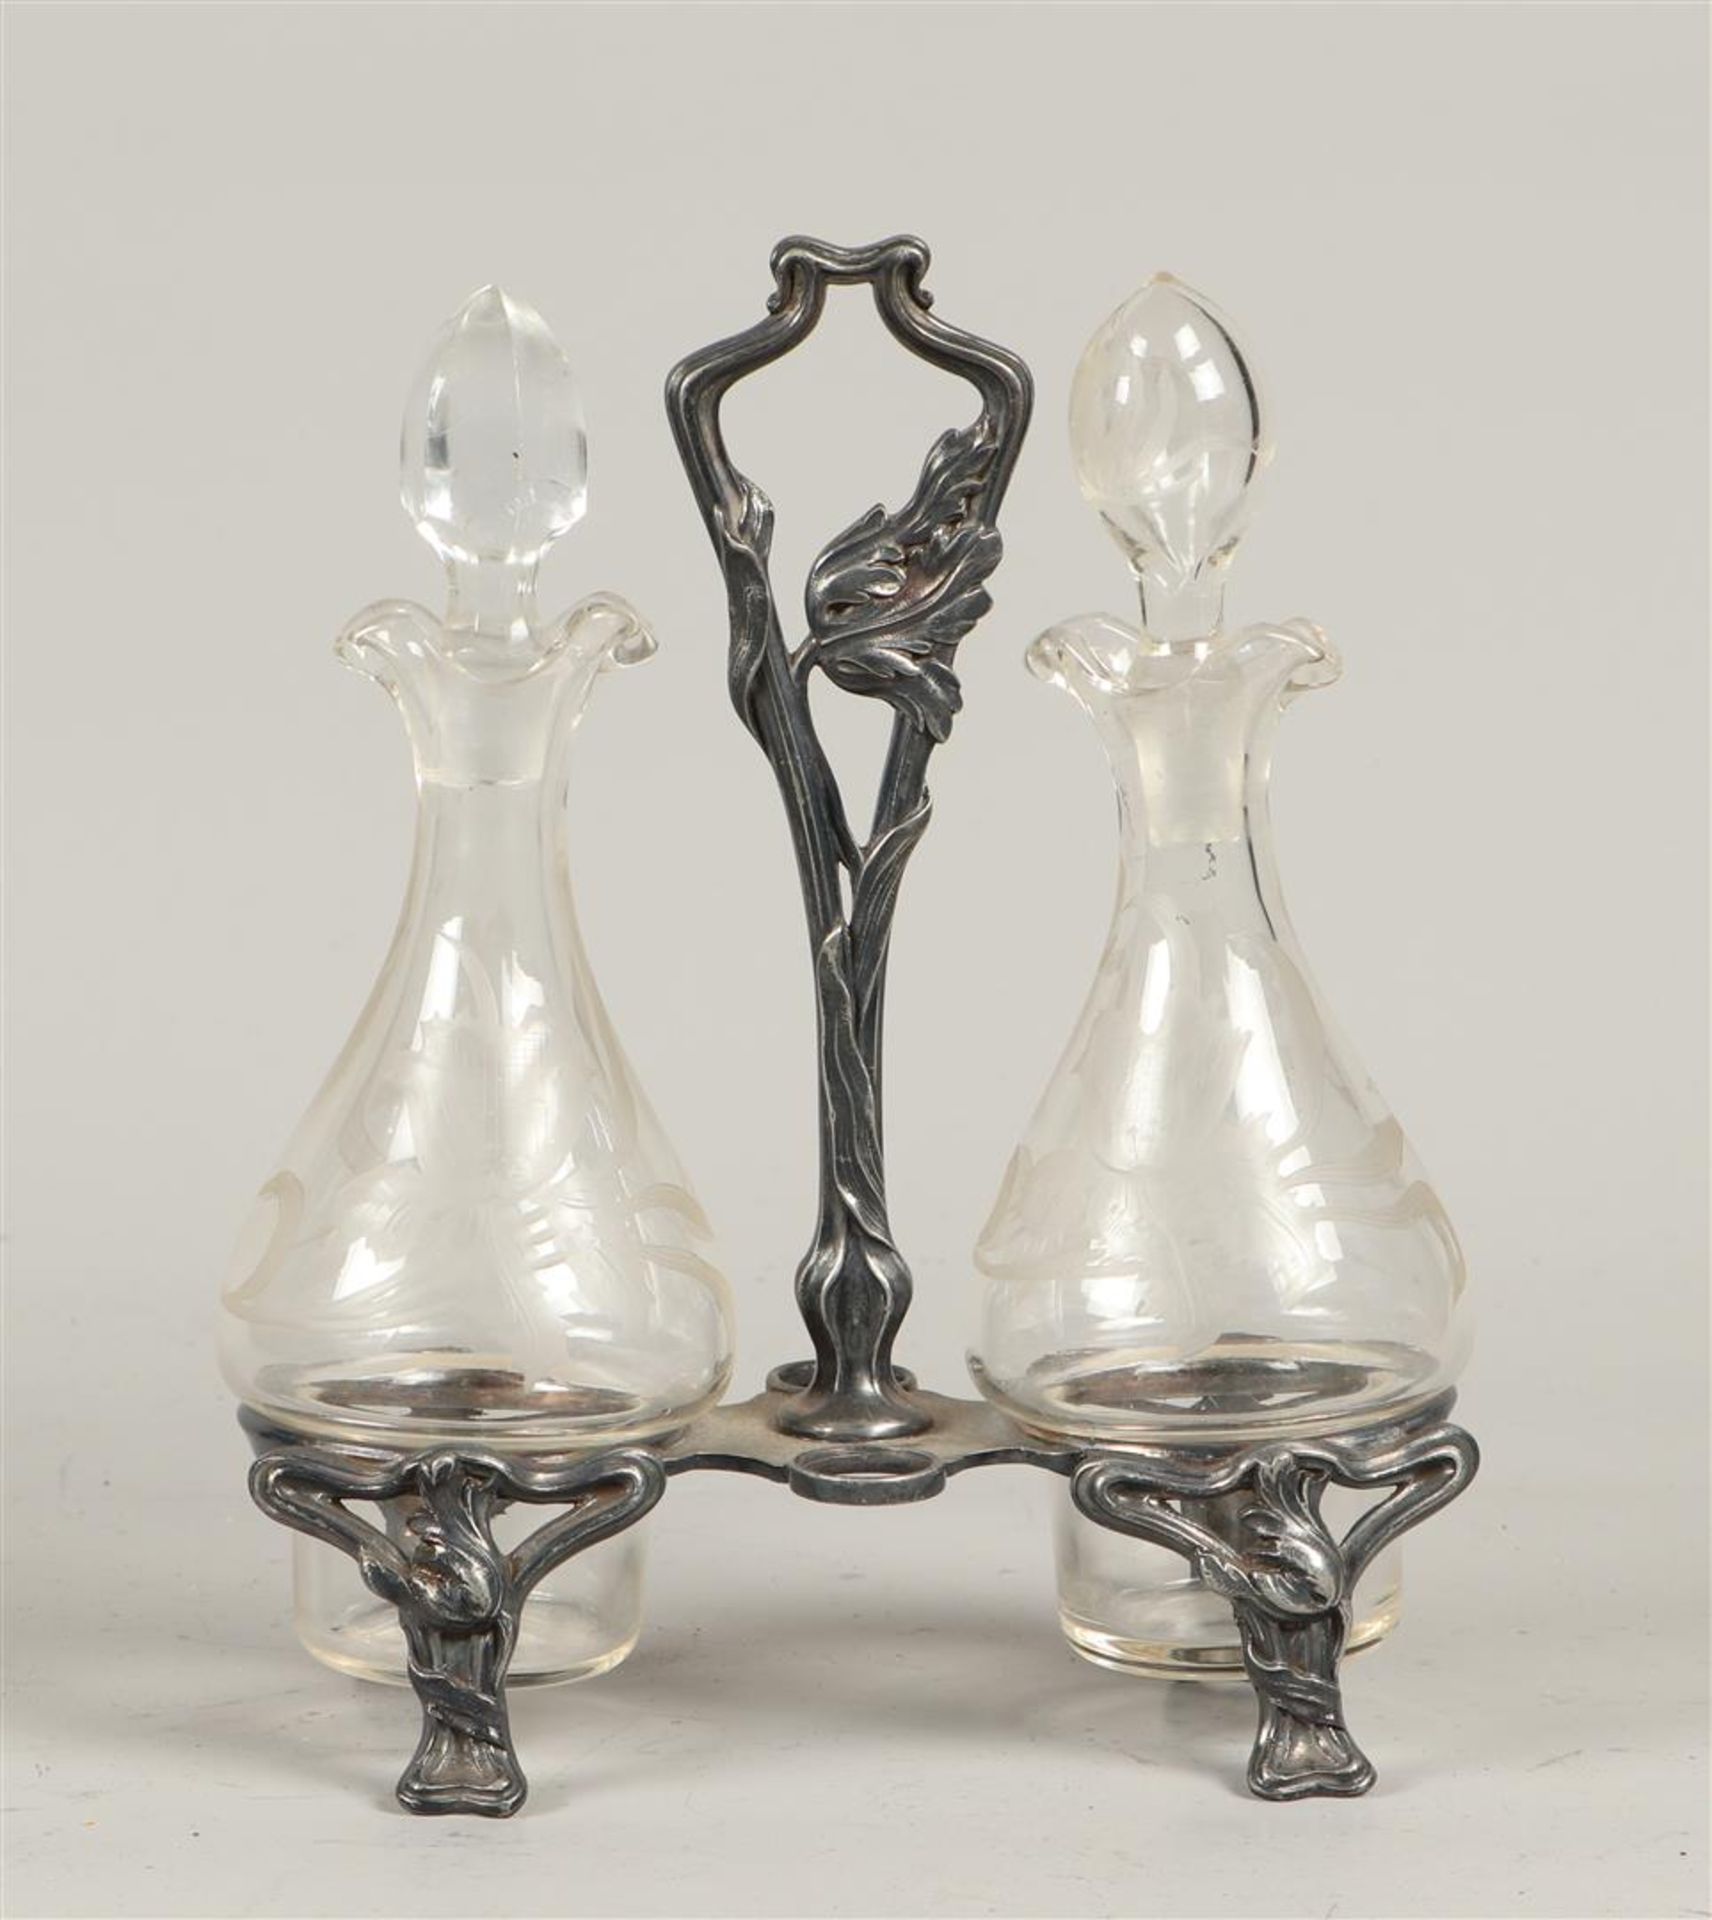 A pewter Jugendstill table set with two engraved decanters.